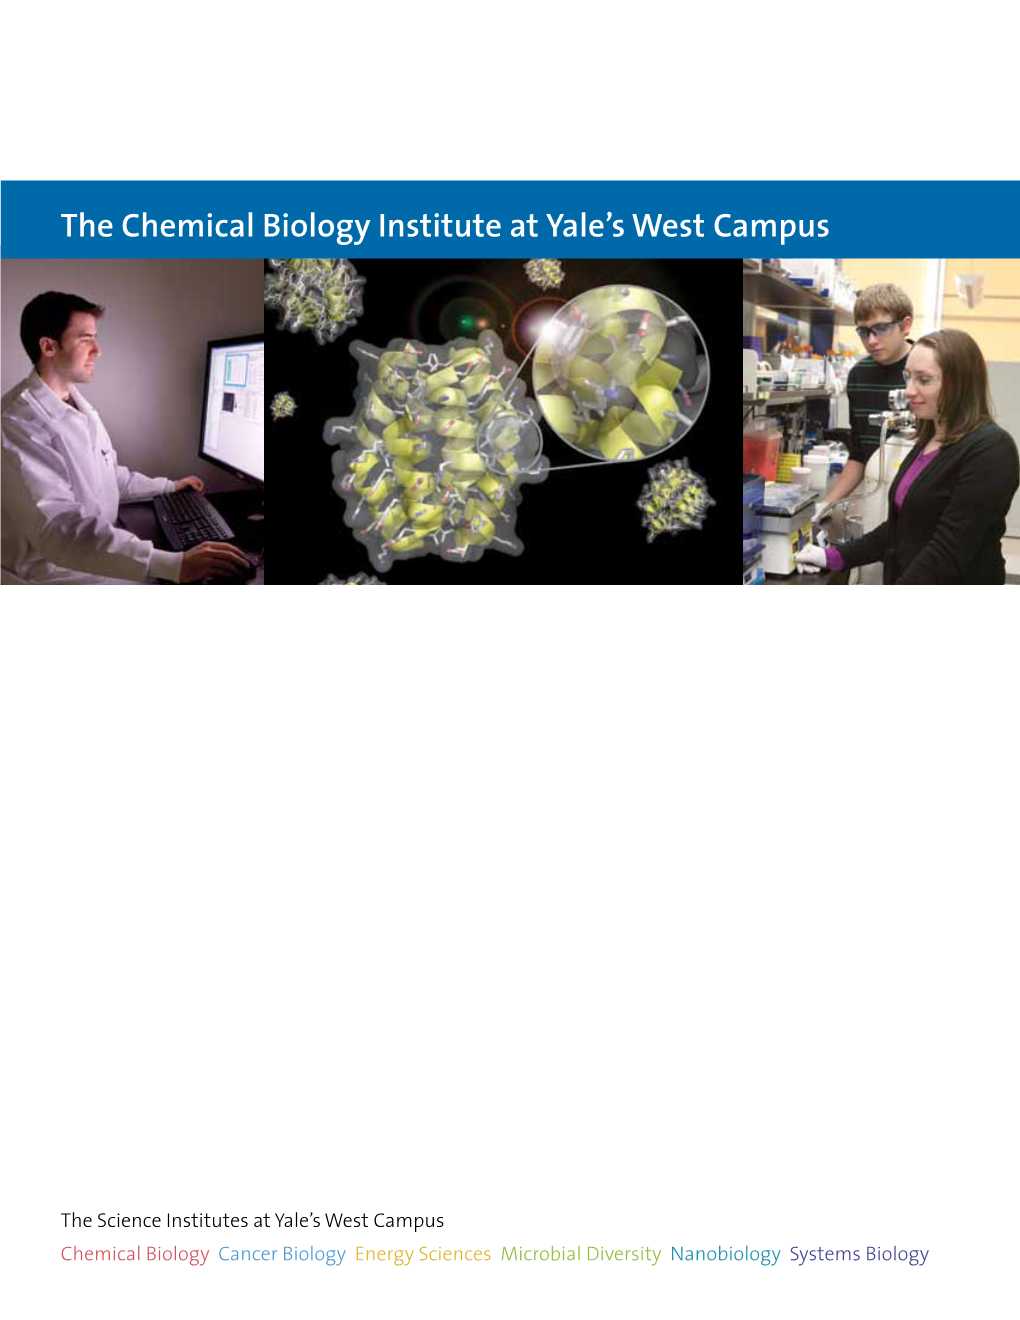 The Chemical Biology Institute at Yale's West Campus